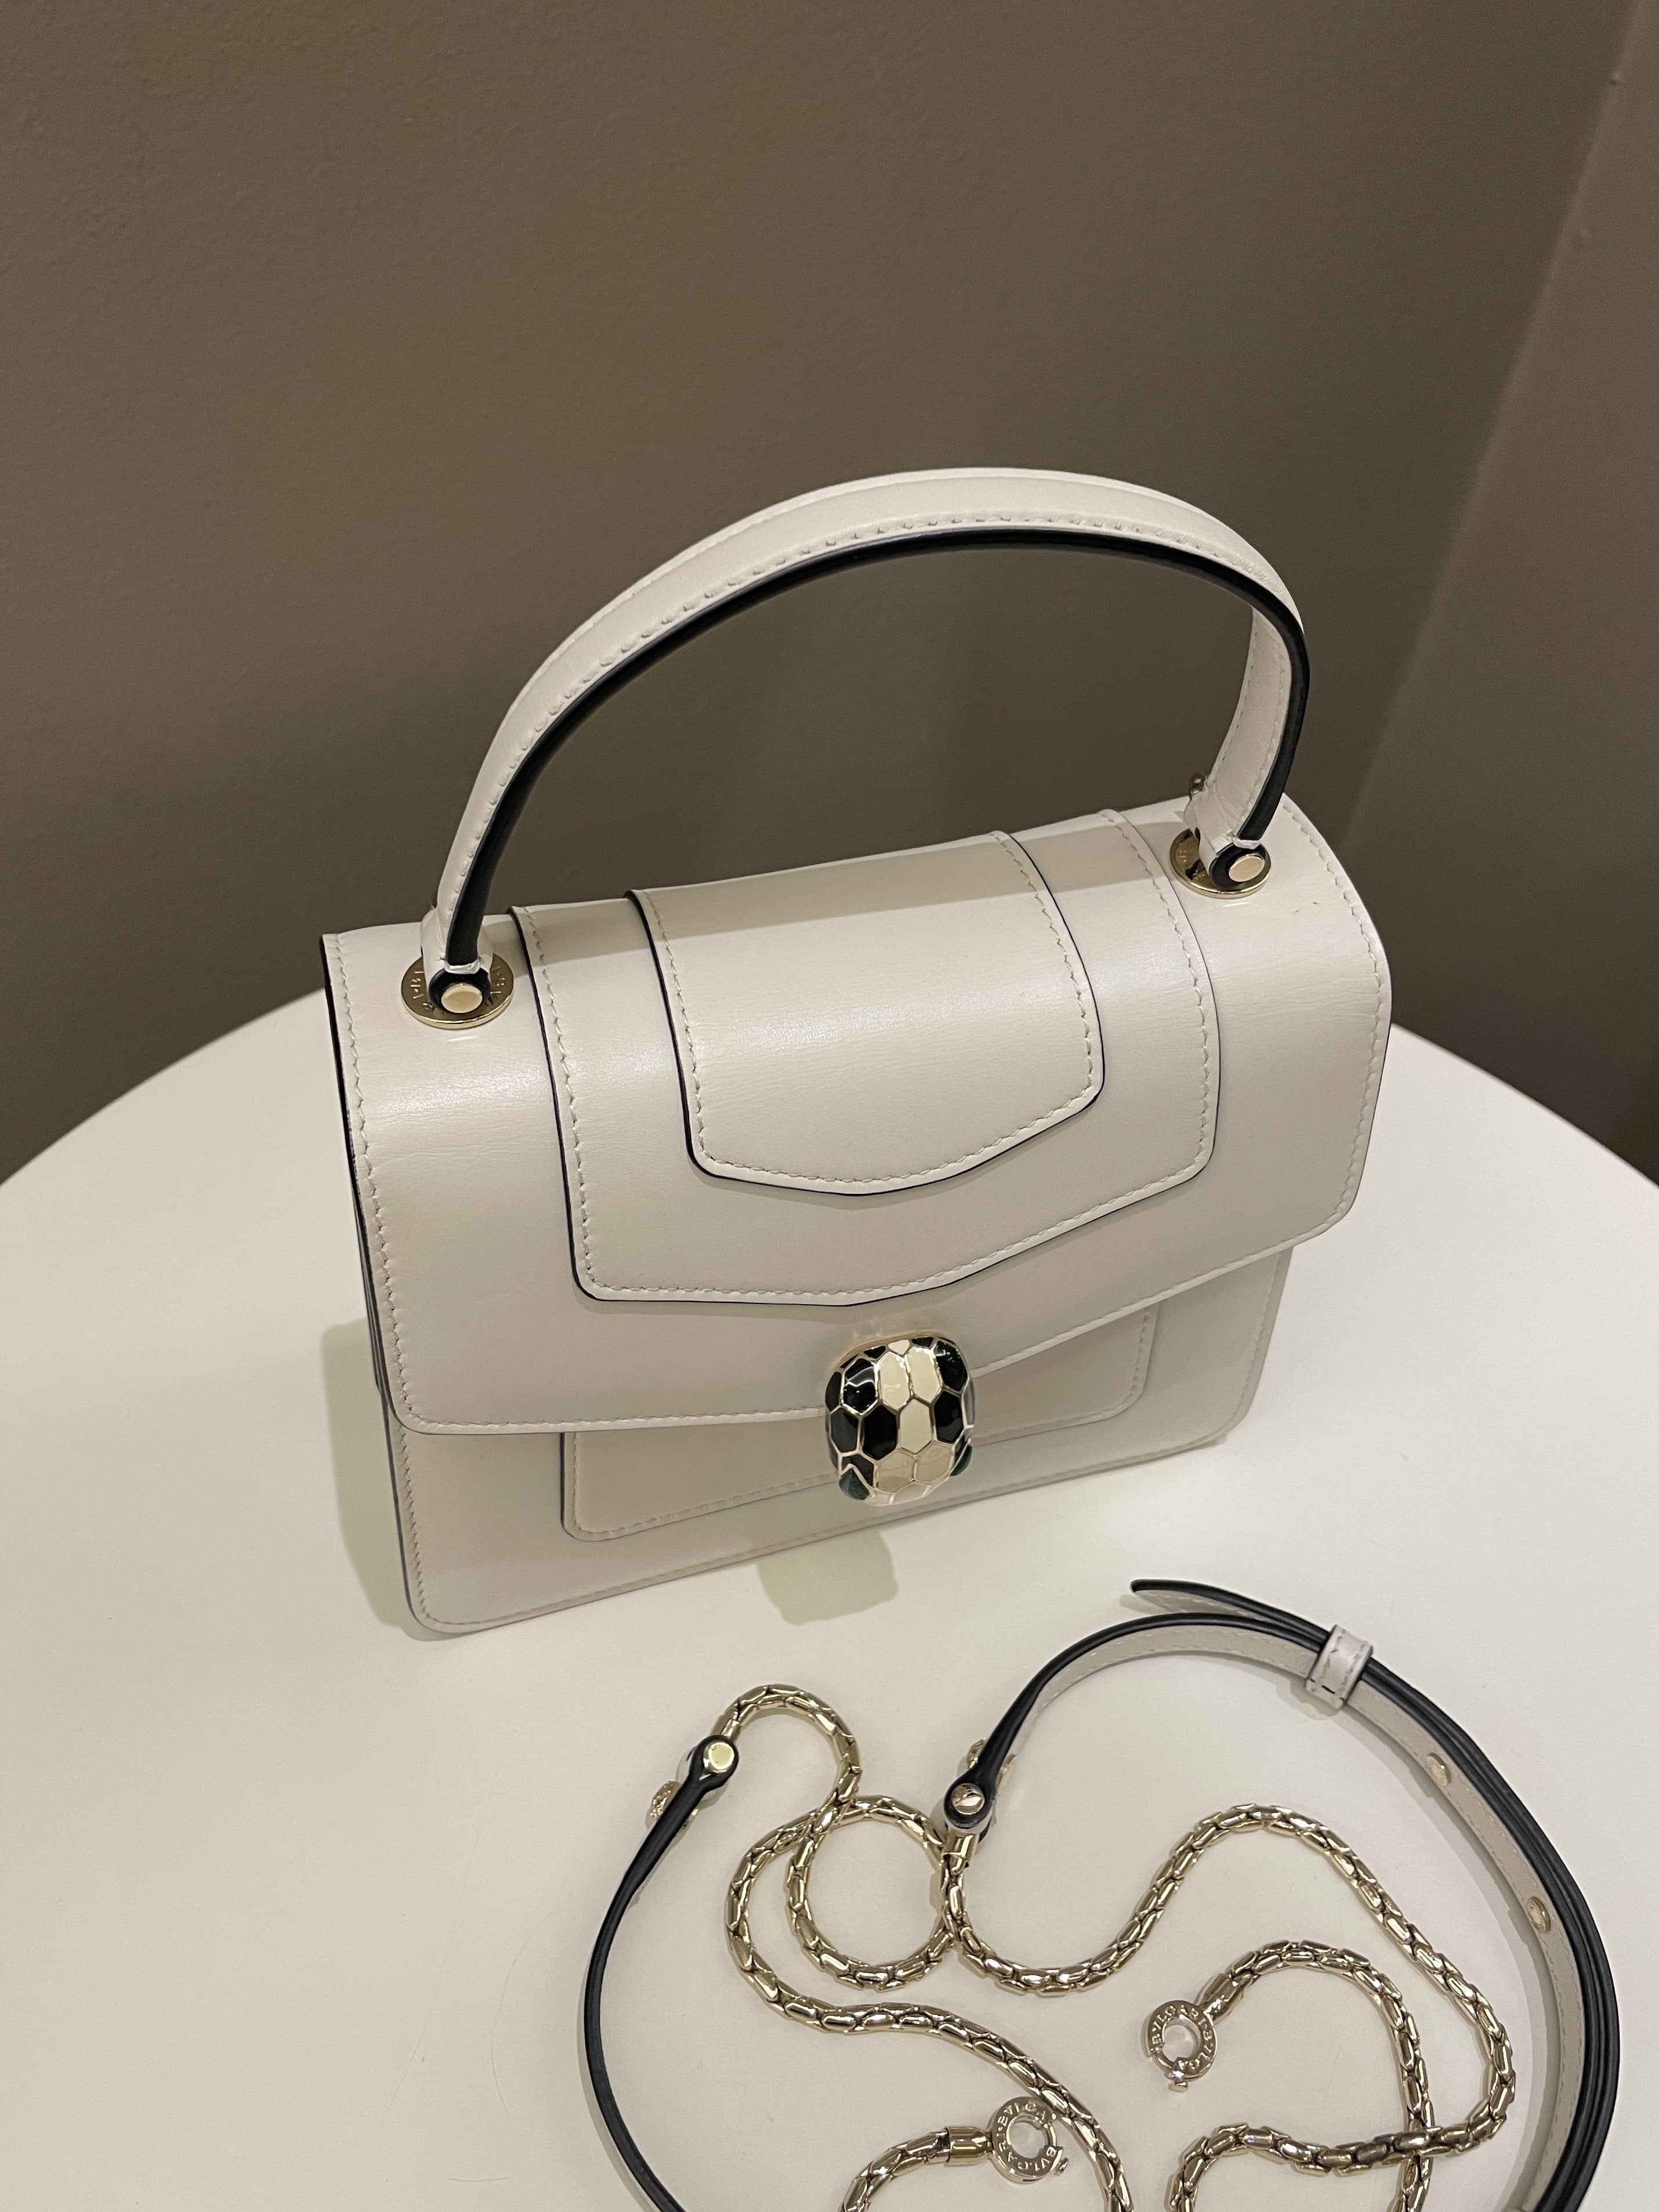 Bvlgari Sepenti Forever Bag
Ivory Calf Leather